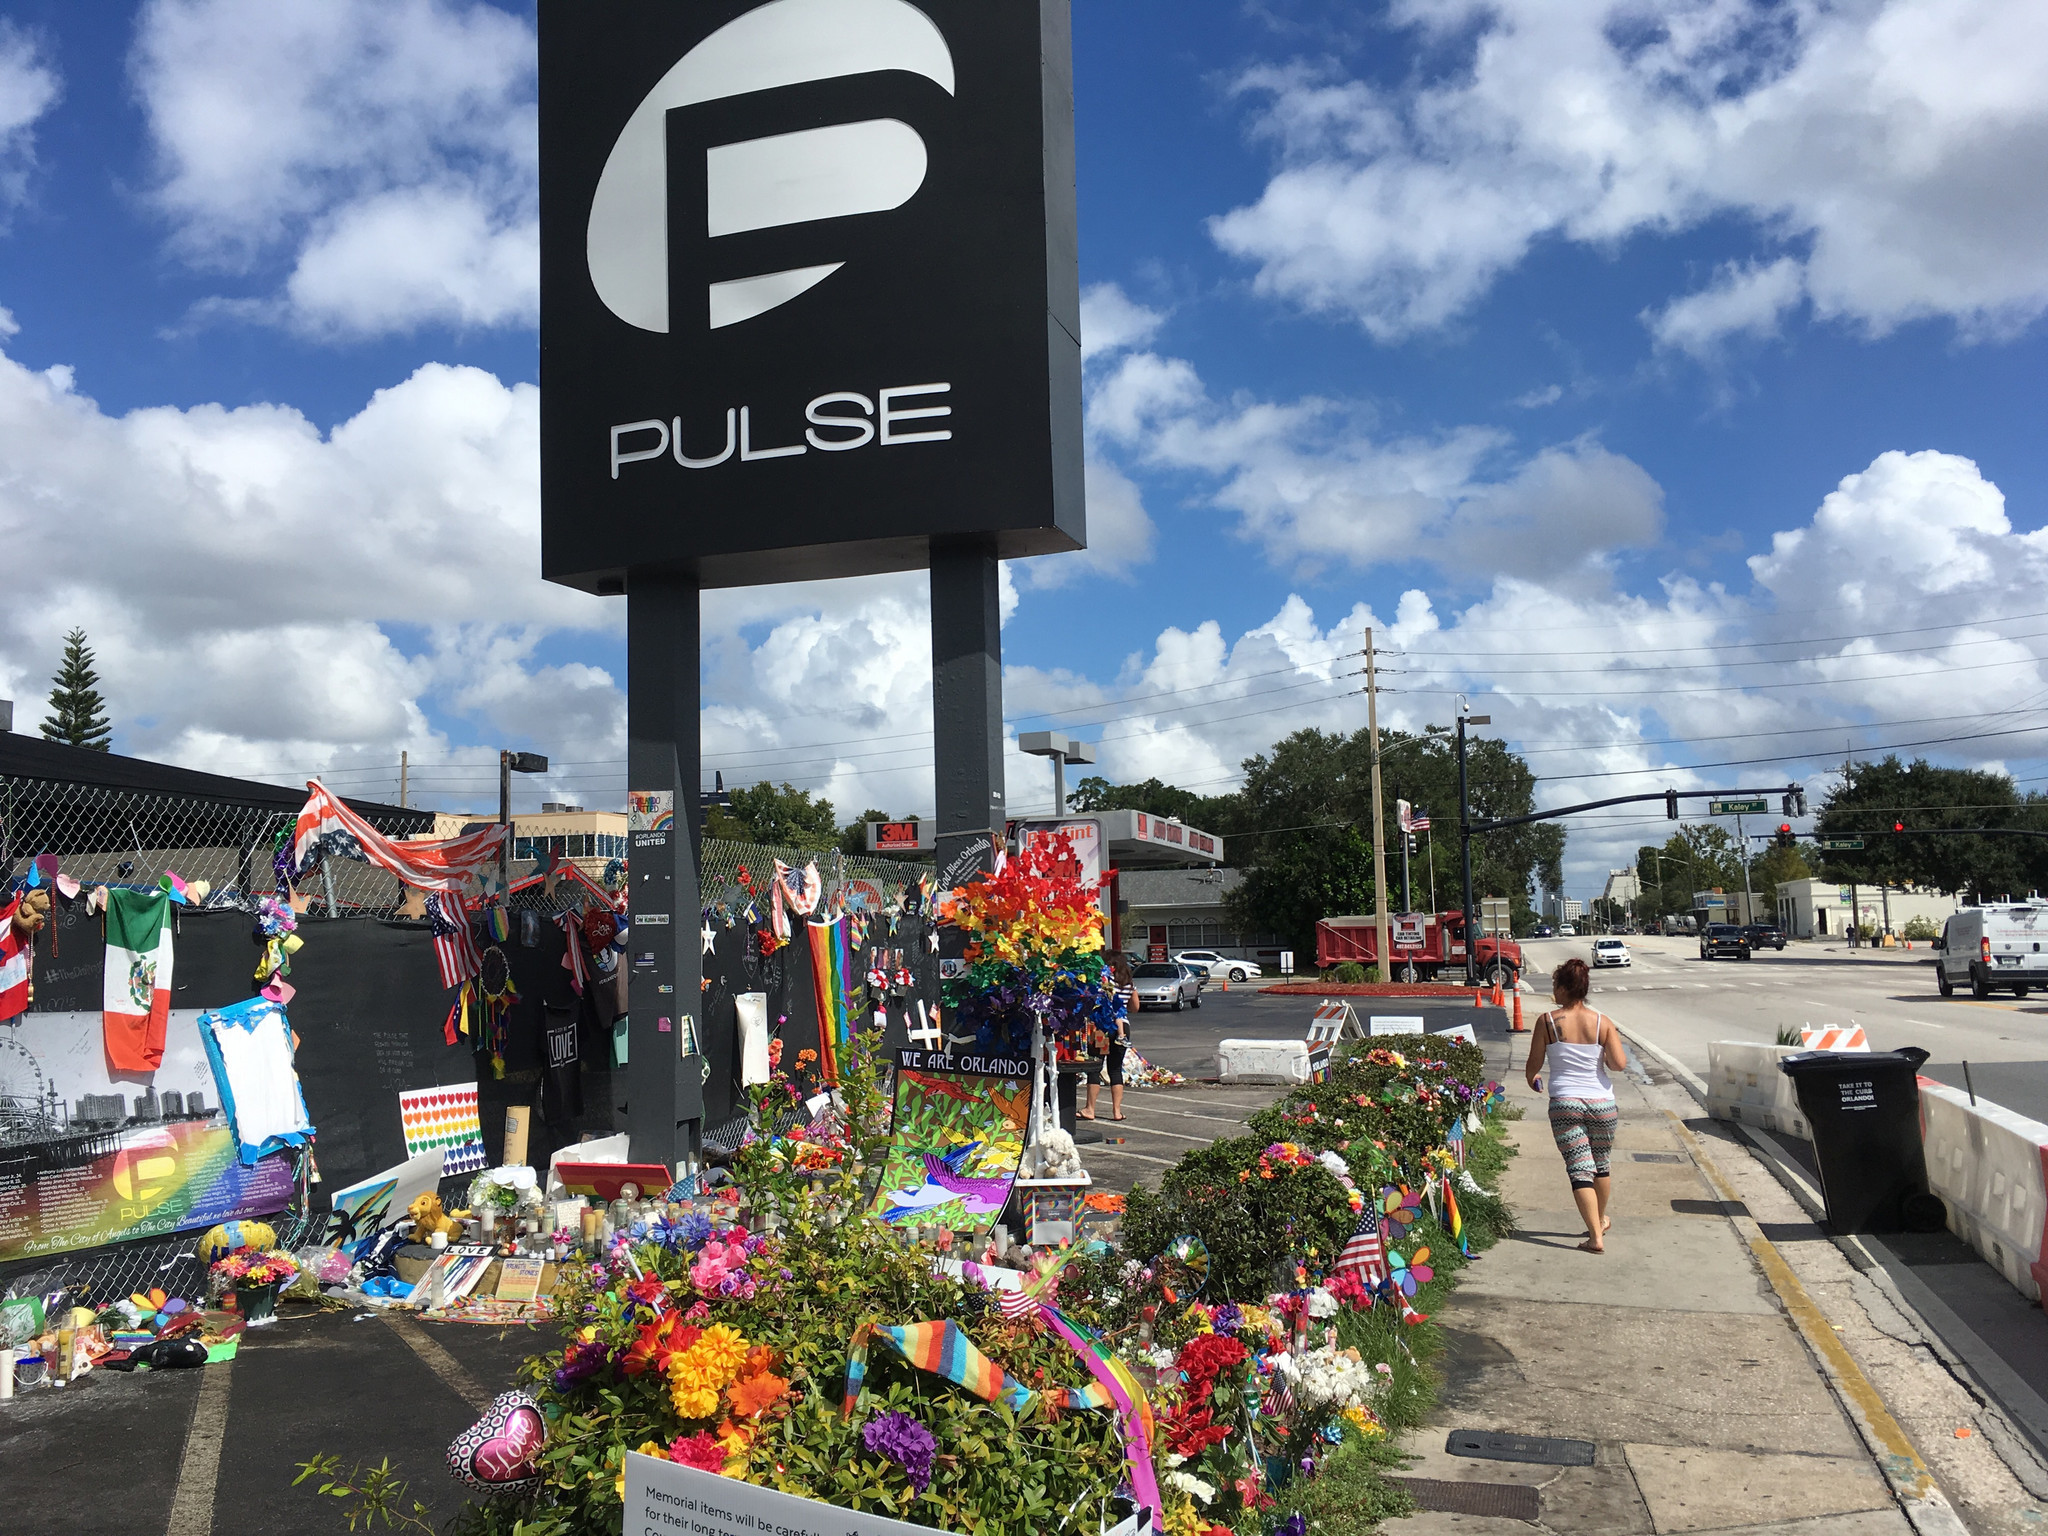 The City of Orlando Plans to Turn Pulse Nightclub Into an Official Memorial